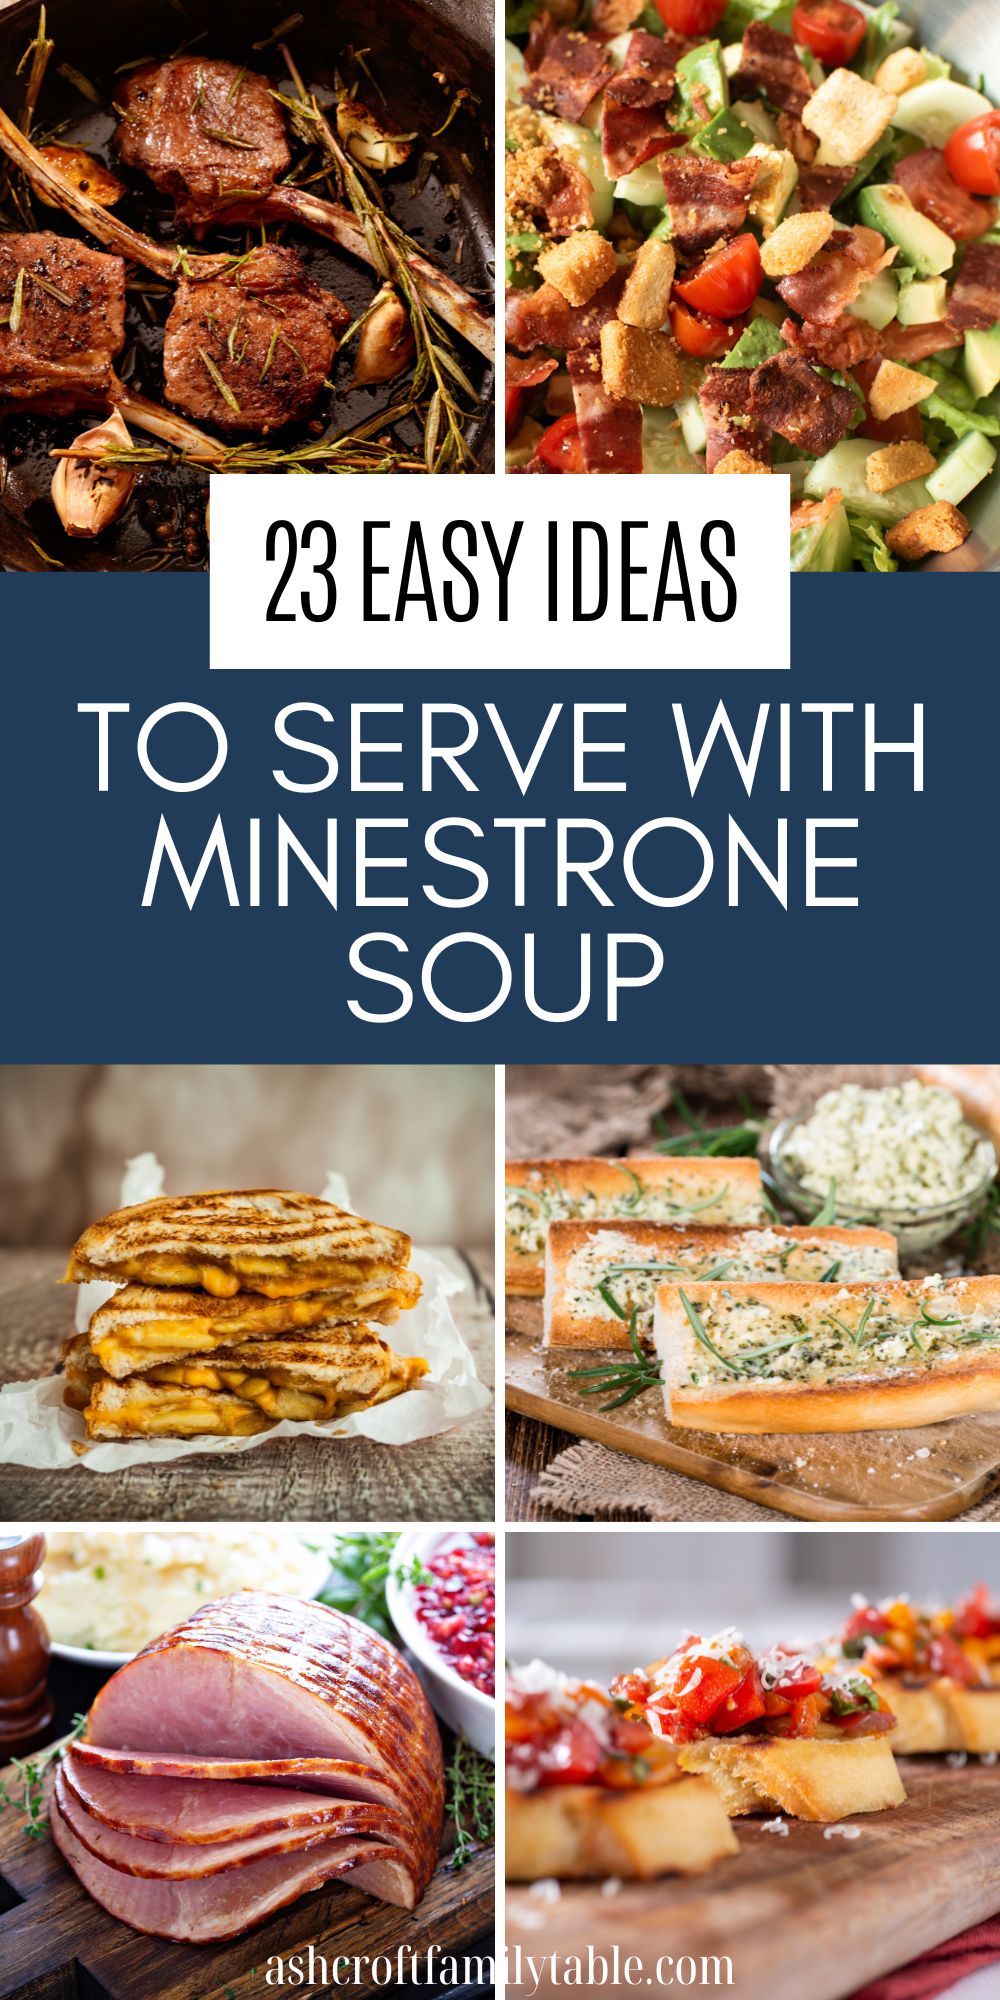 Graphic with text and photo collage of different dishes to serve with minestrone soup.